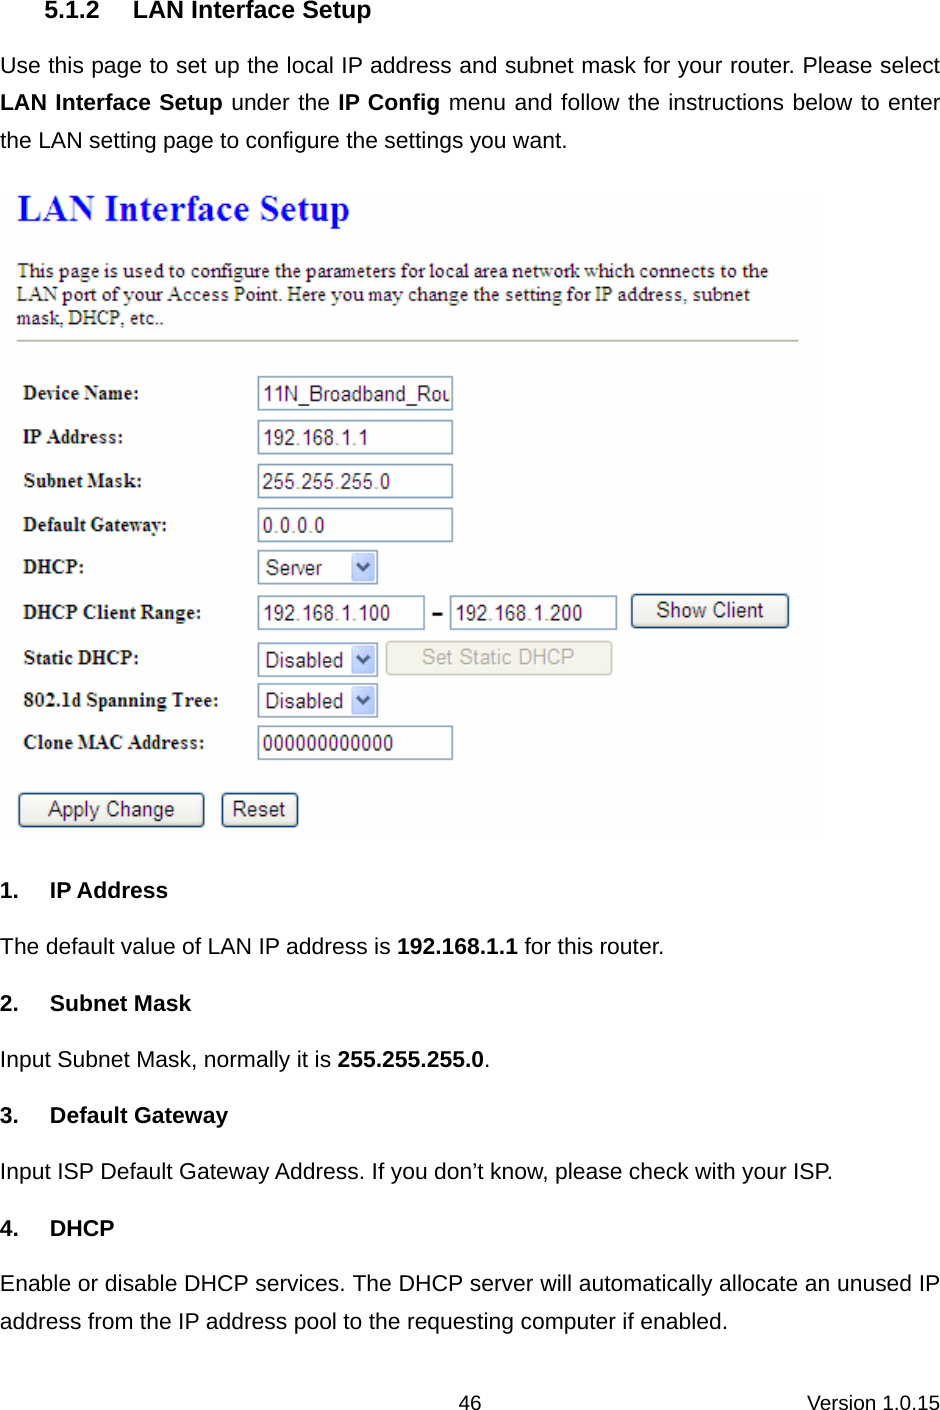 Version 1.0.15 46 5.1.2  LAN Interface Setup Use this page to set up the local IP address and subnet mask for your router. Please select LAN Interface Setup under the IP Config menu and follow the instructions below to enter the LAN setting page to configure the settings you want.  1. IP Address The default value of LAN IP address is 192.168.1.1 for this router. 2. Subnet Mask Input Subnet Mask, normally it is 255.255.255.0. 3. Default Gateway Input ISP Default Gateway Address. If you don’t know, please check with your ISP. 4. DHCP Enable or disable DHCP services. The DHCP server will automatically allocate an unused IP address from the IP address pool to the requesting computer if enabled. 